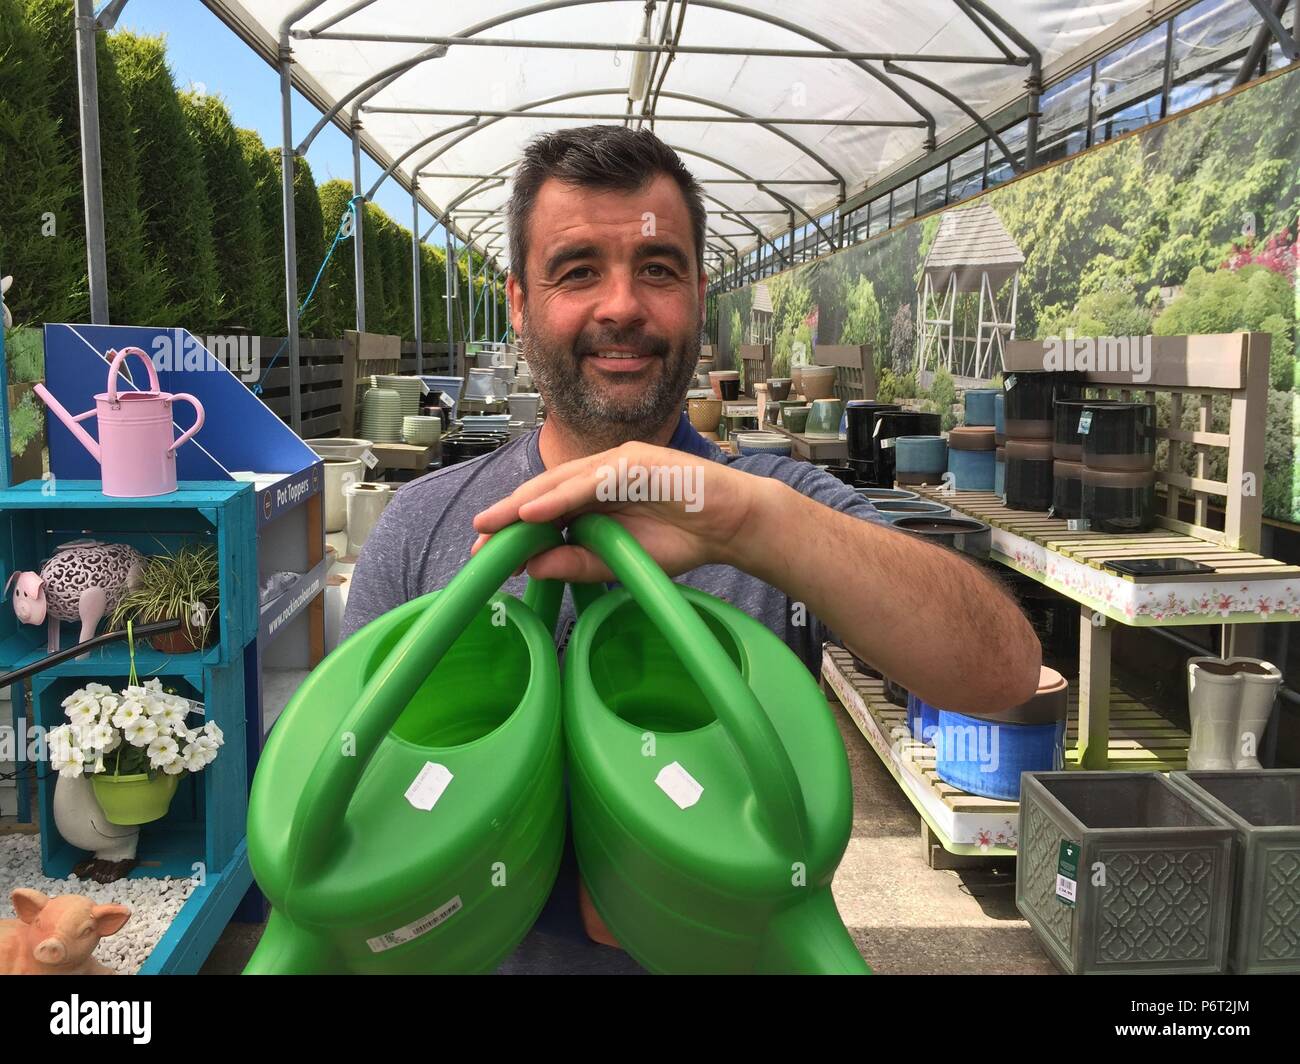 Sales representative for Stewart Plastics Neil Griffiths holding watering cans, as a hosepipe ban in Northern Ireland has prompted an unprecedented rush on another gardener&Otilde;s friend, the watering can. Cans of all shapes and sizes have been flying off the shelves across the region as gardeners turn to more labour intensive means to keep their plants and lawns hydrated. Stock Photo